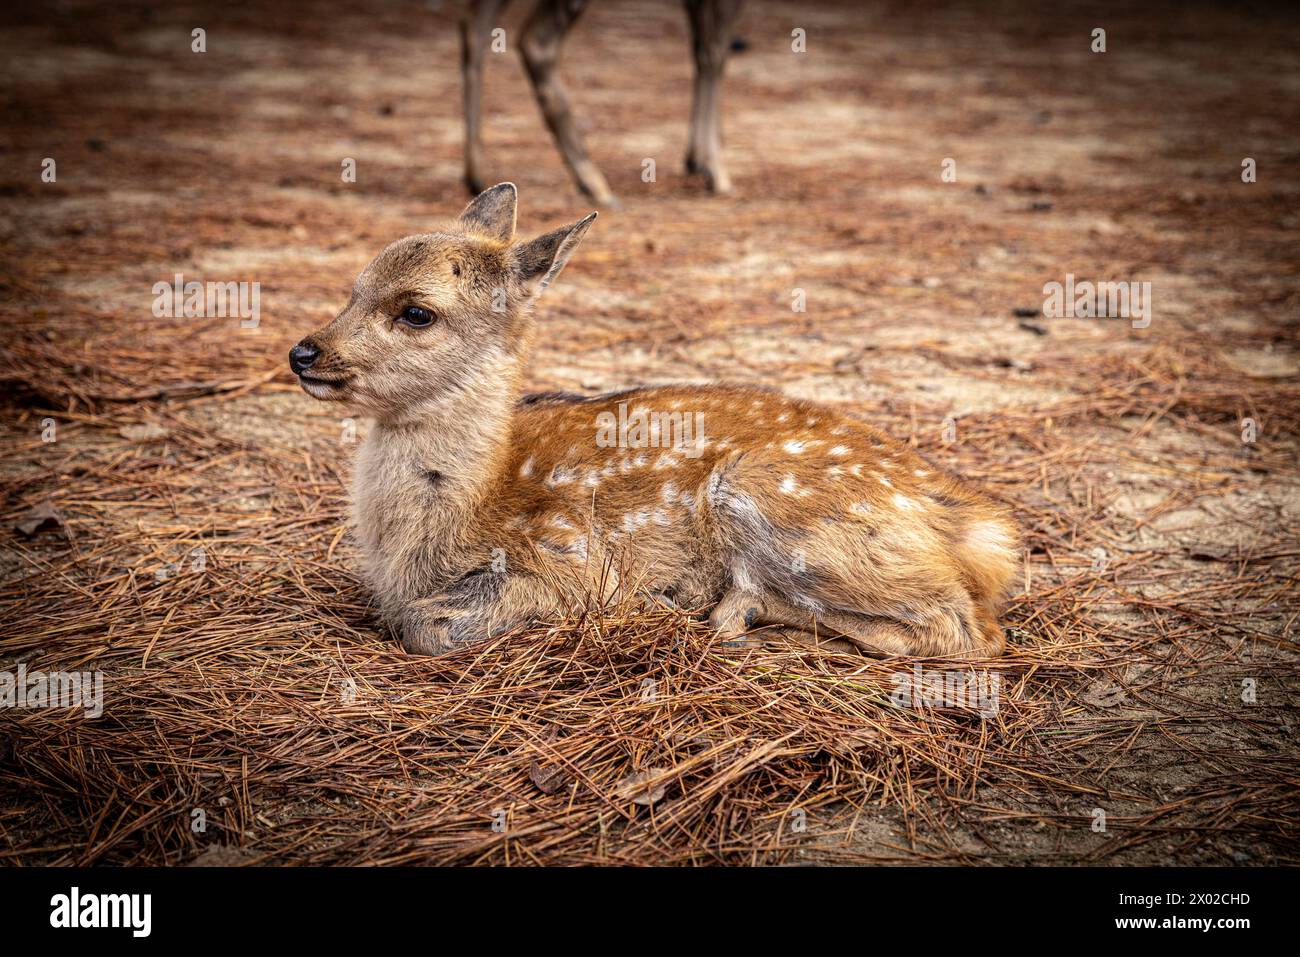 Cute spotted fawn lying on pine needles in Nara japan Stock Photo